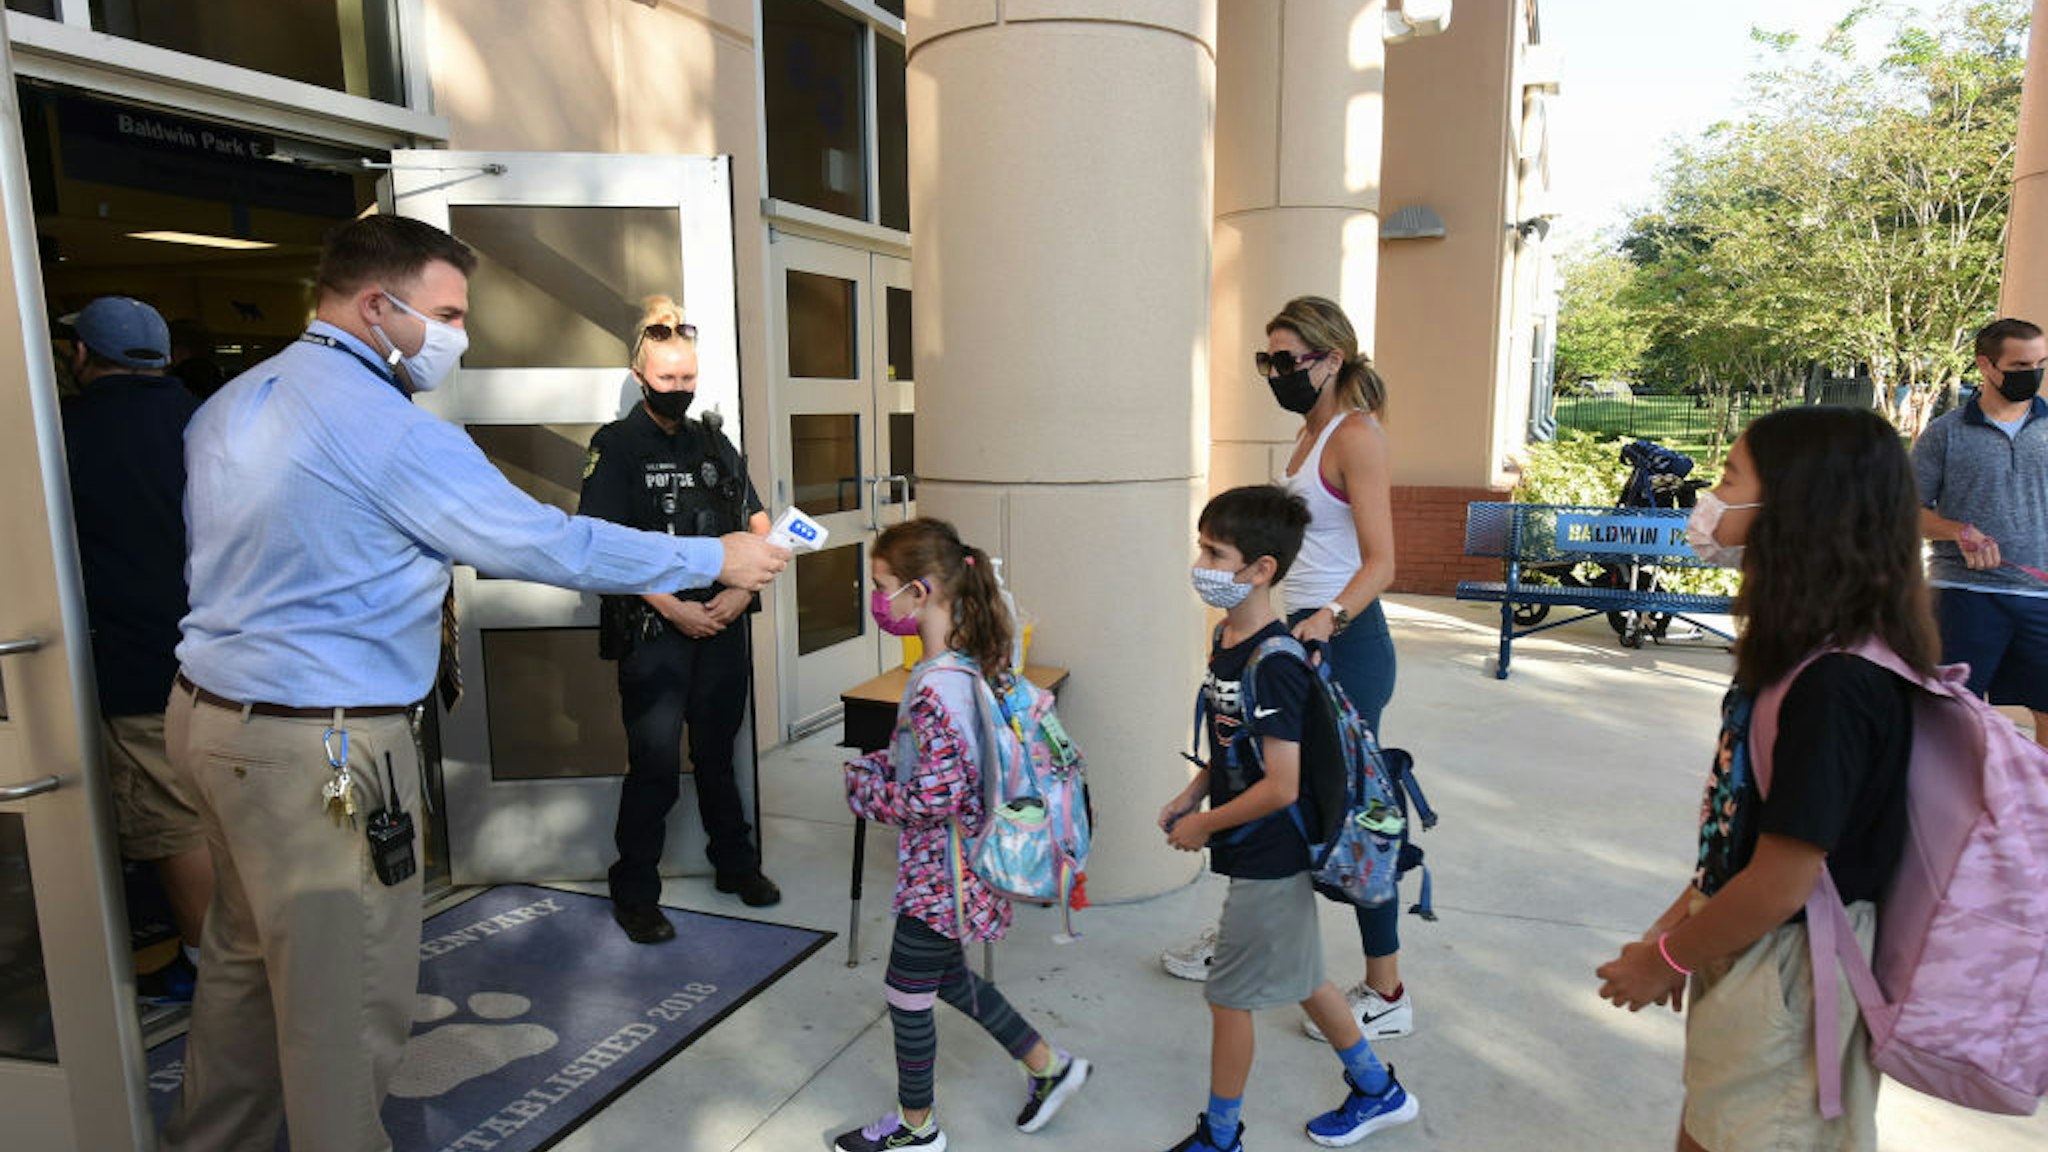 ORLANDO, FLORIDA, UNITED STATES - 2021/08/10: Principal Nathan Hay performs temperature checks on students as they arrive on the first day of classes for the 2021-22 school year at Baldwin Park Elementary School. Due to the current surge in COVID-19 cases in Florida, Orange County public schools have implemented a face mask mandate for students for 30 days unless a parent chooses to opt out of the requirement.